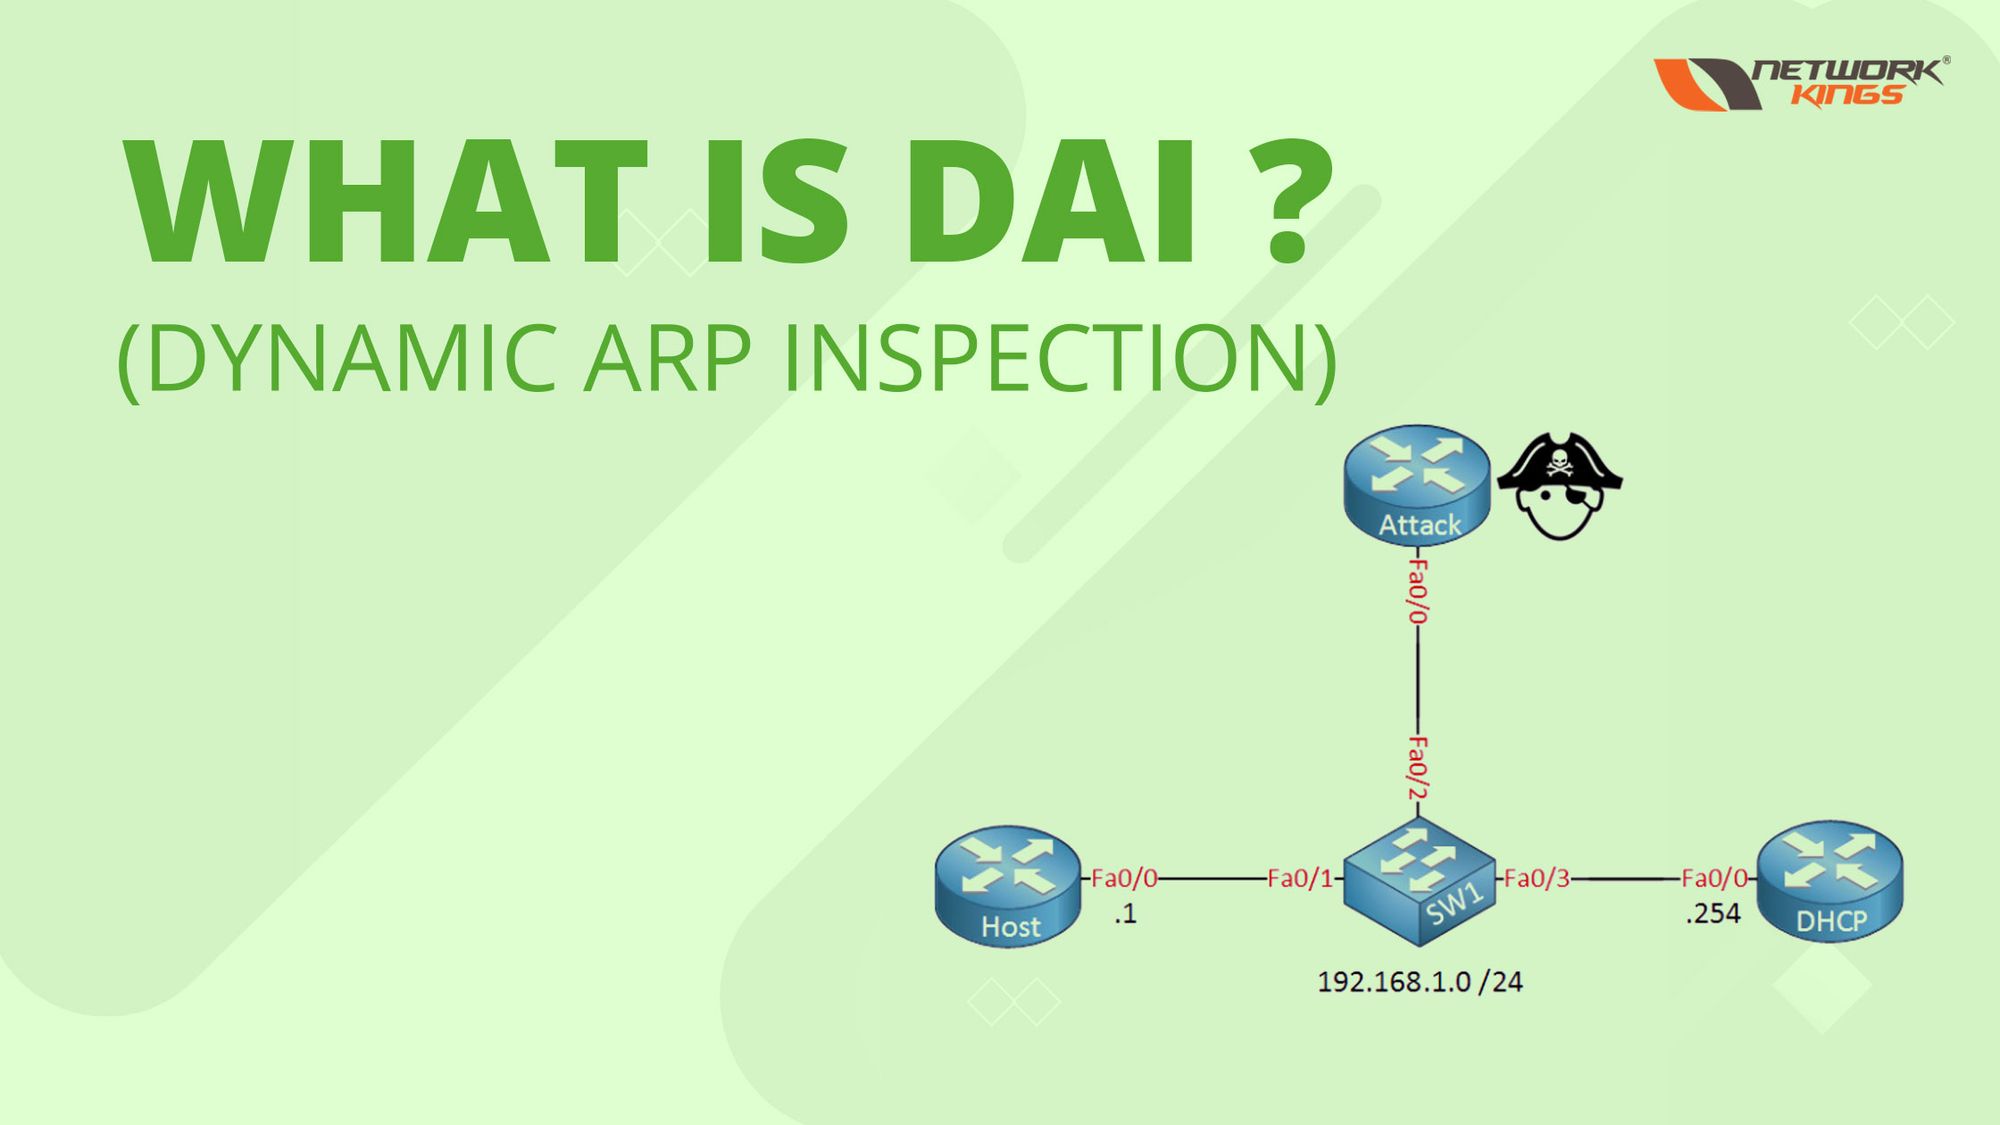 What is DAI (Dynamic ARP Inspection)?